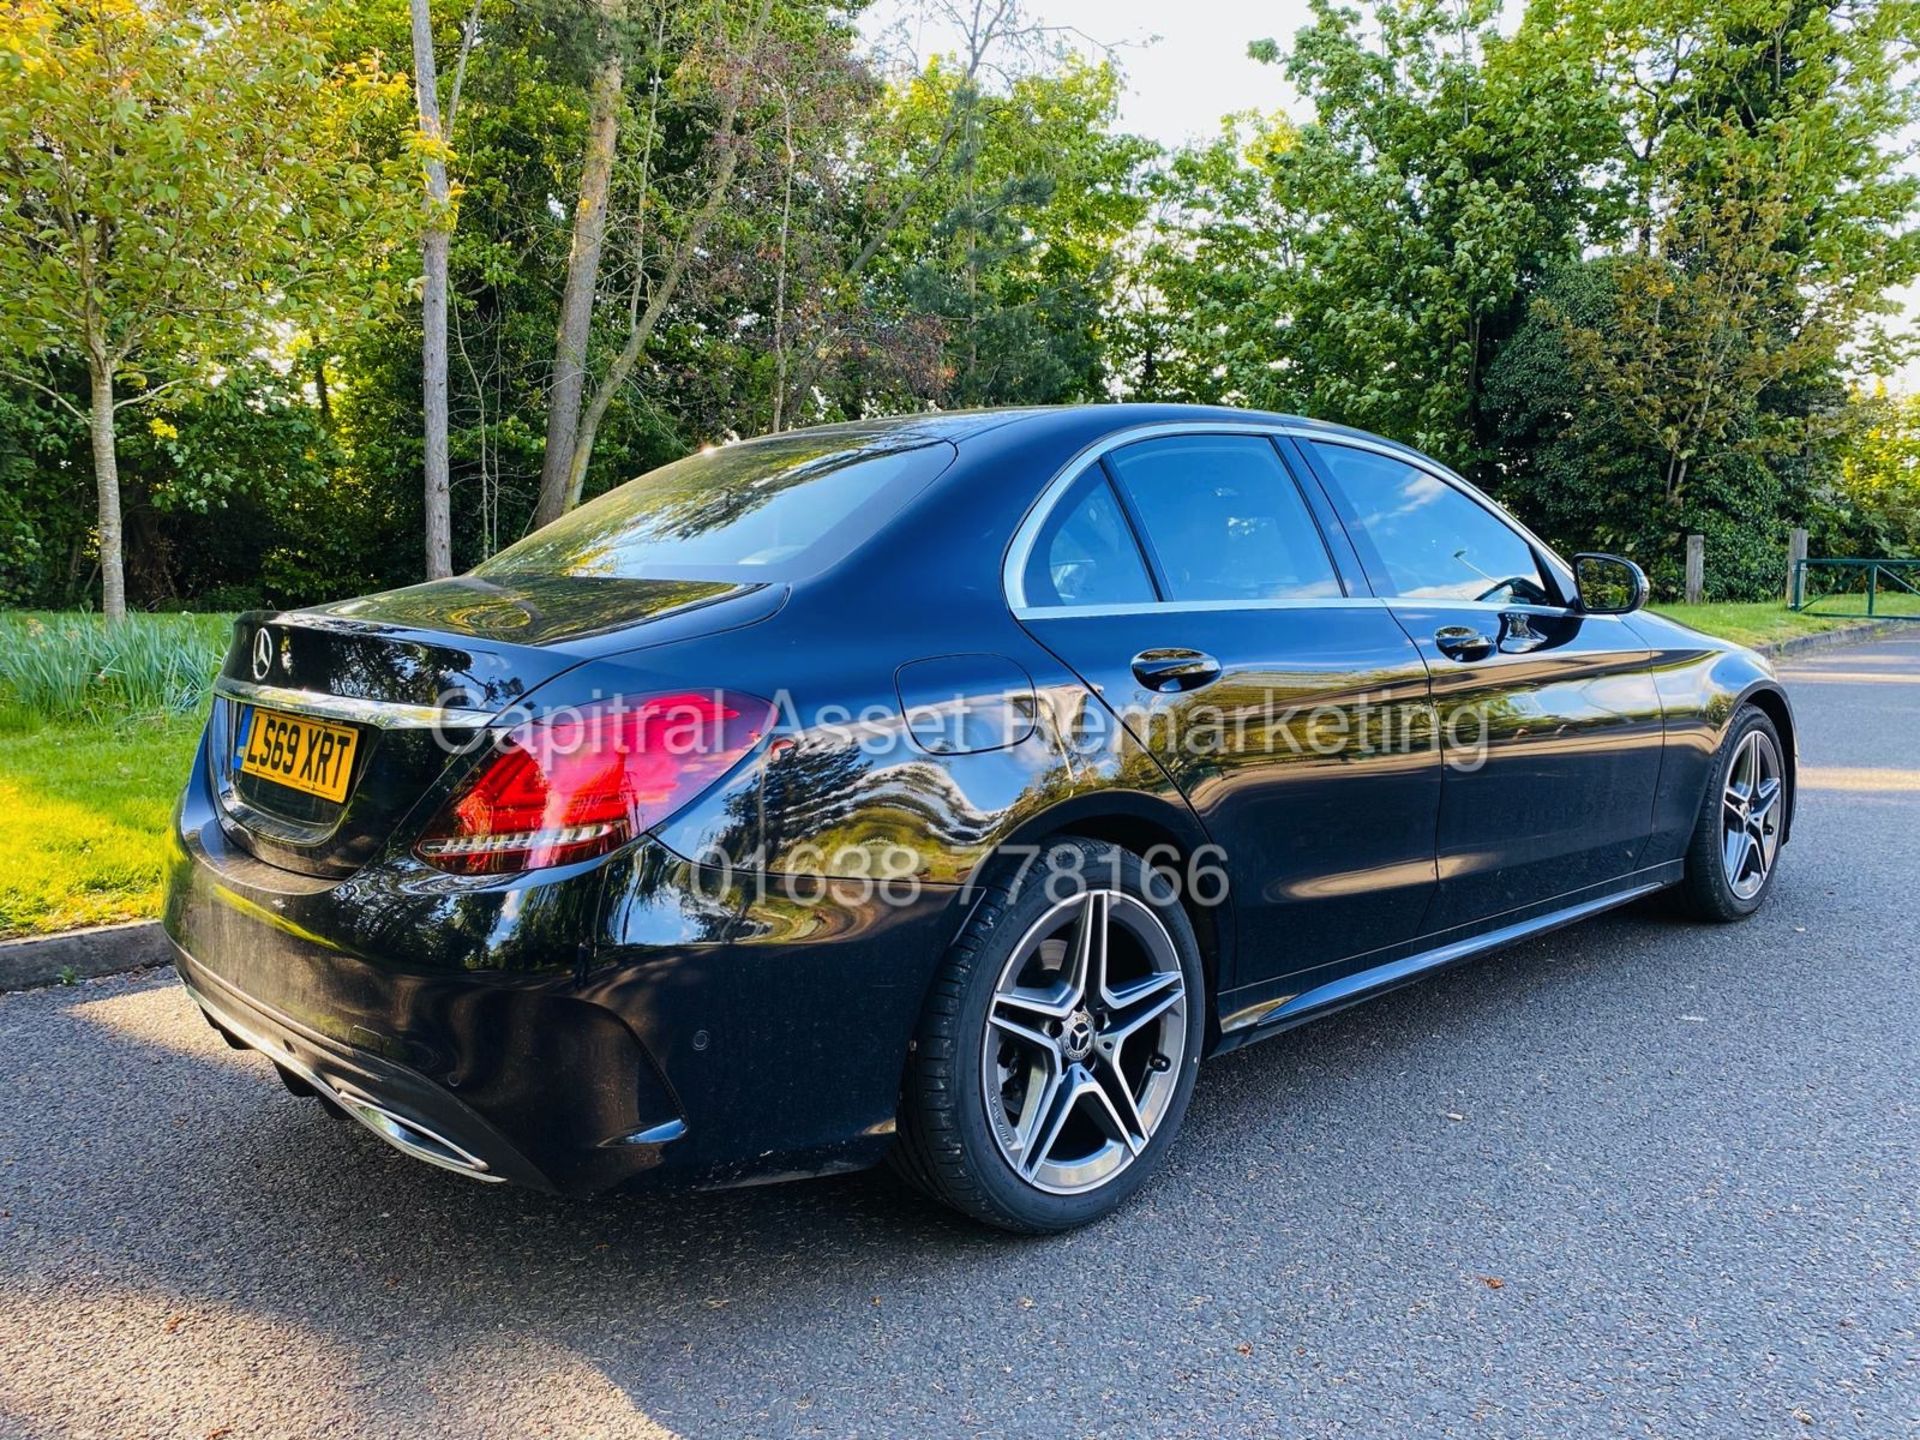 MERCEDES C220d "AMG-LINE" 9G TRONIC (69 REG - FACELIFT MODEL) 1 OWNER *GREAT SPEC* A MUST SEE - Image 4 of 30